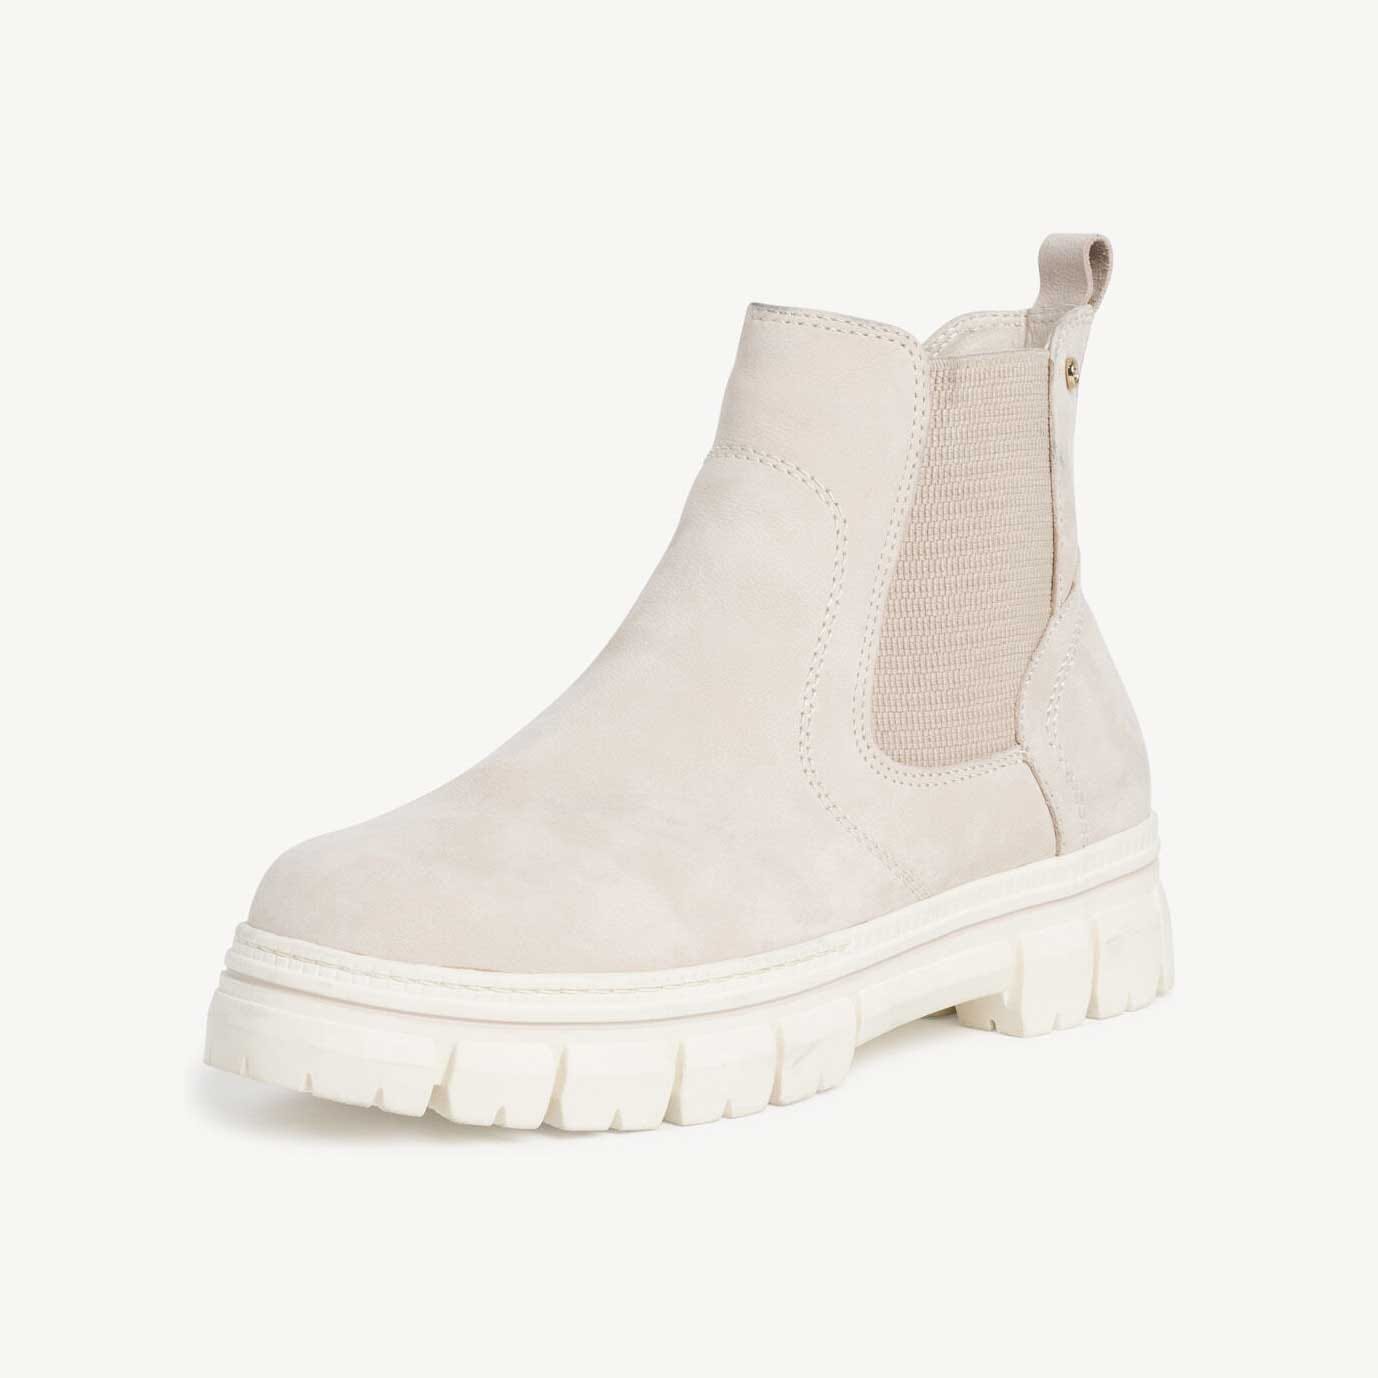 Tamaris Unisex Comfort Cairns Leather Boots Unisex Shoes Shafi Pvt. Limited Ivory EUR 36 